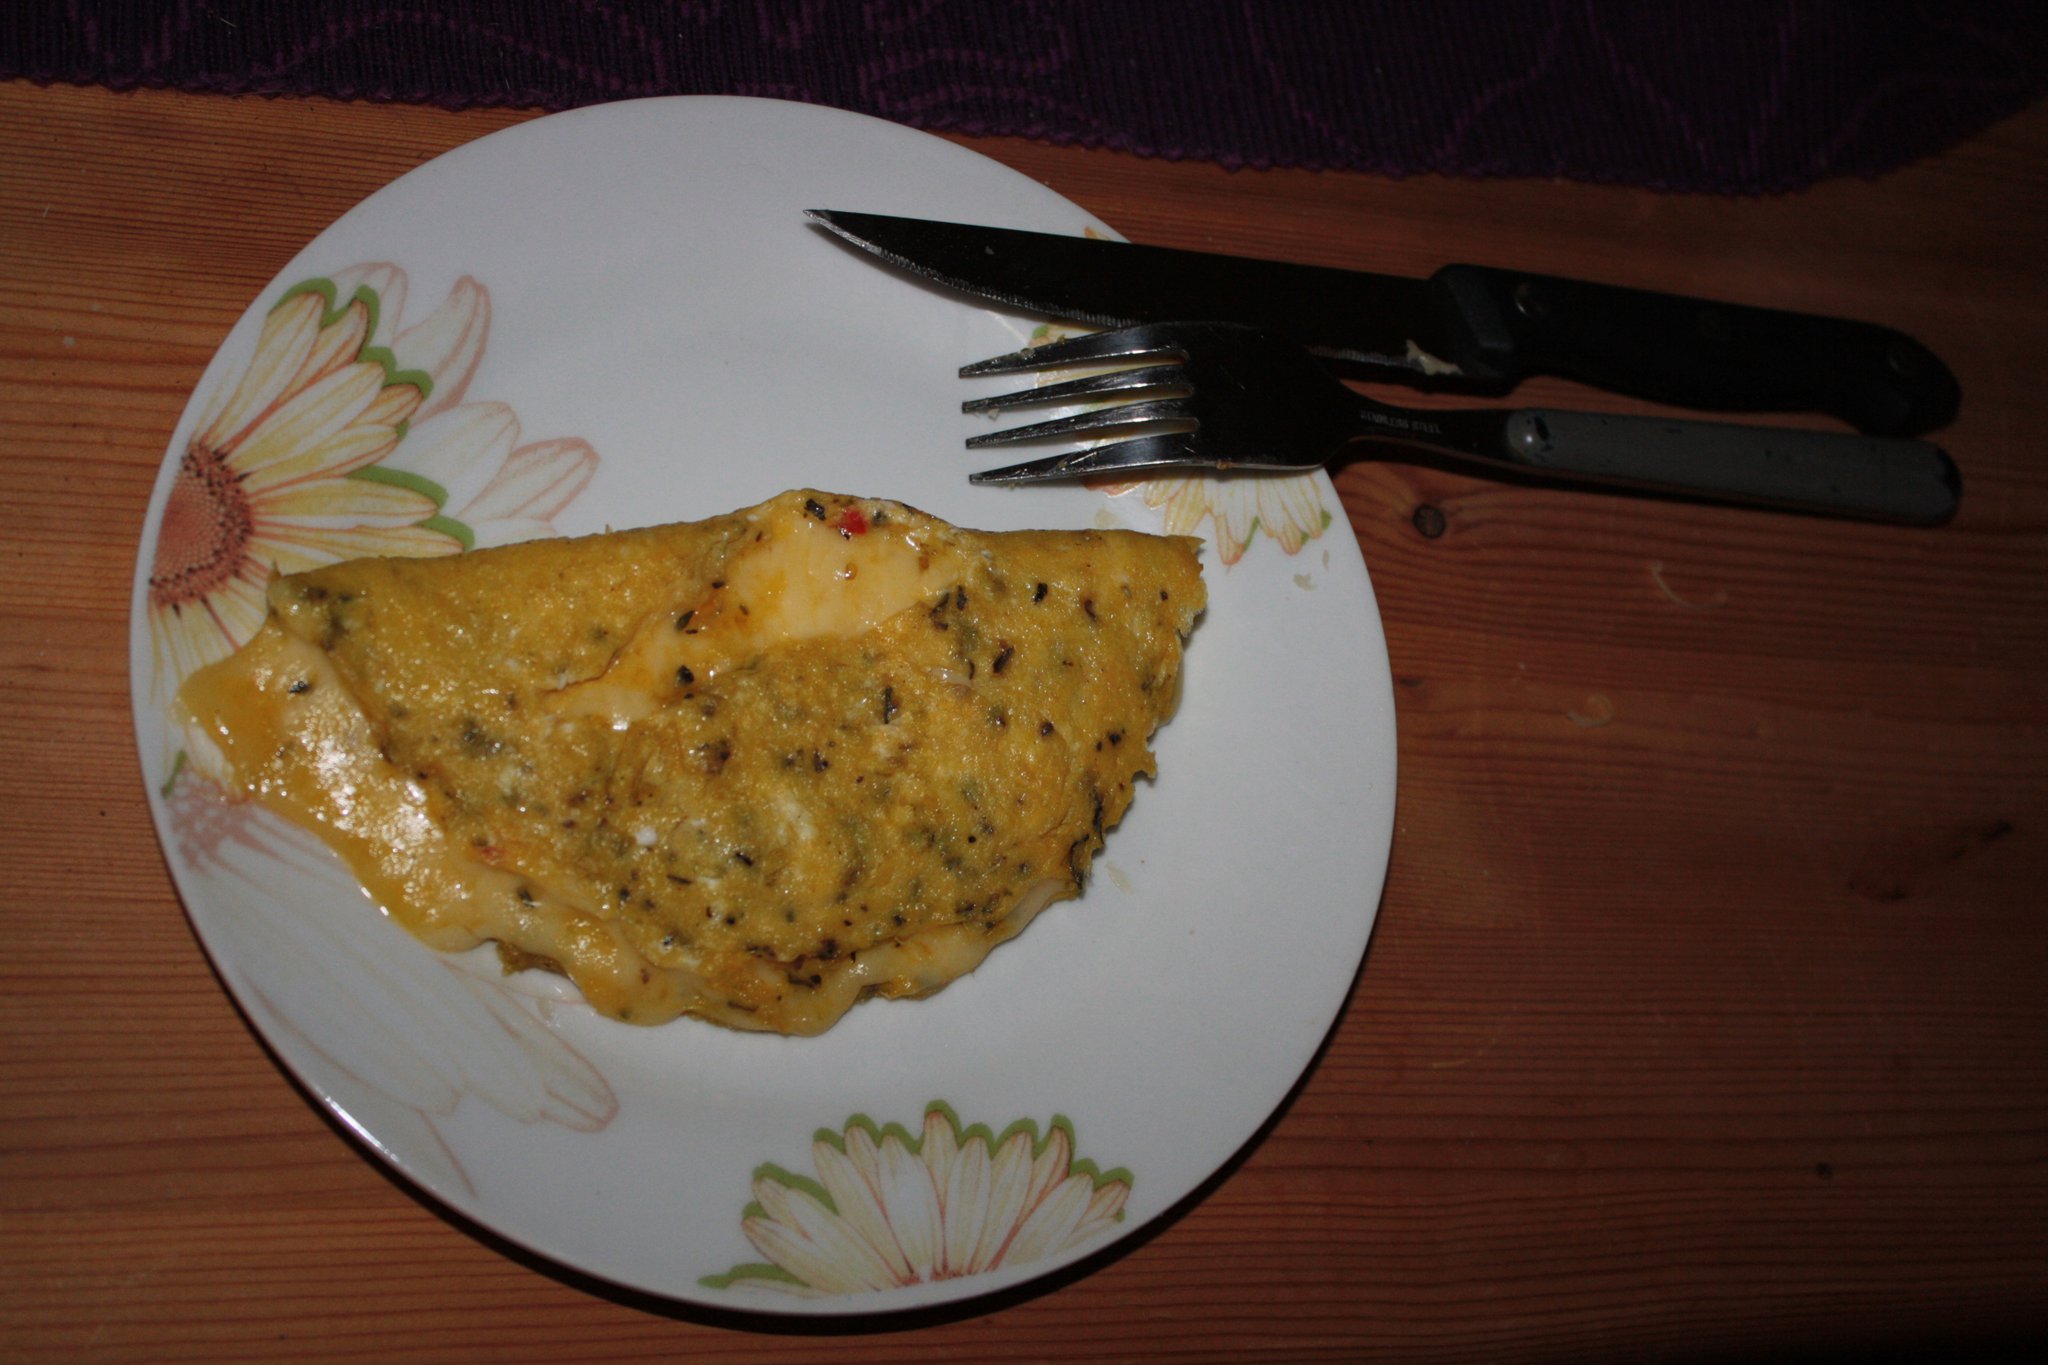 A garlic and cheese omelette with a touch of chili pepper.